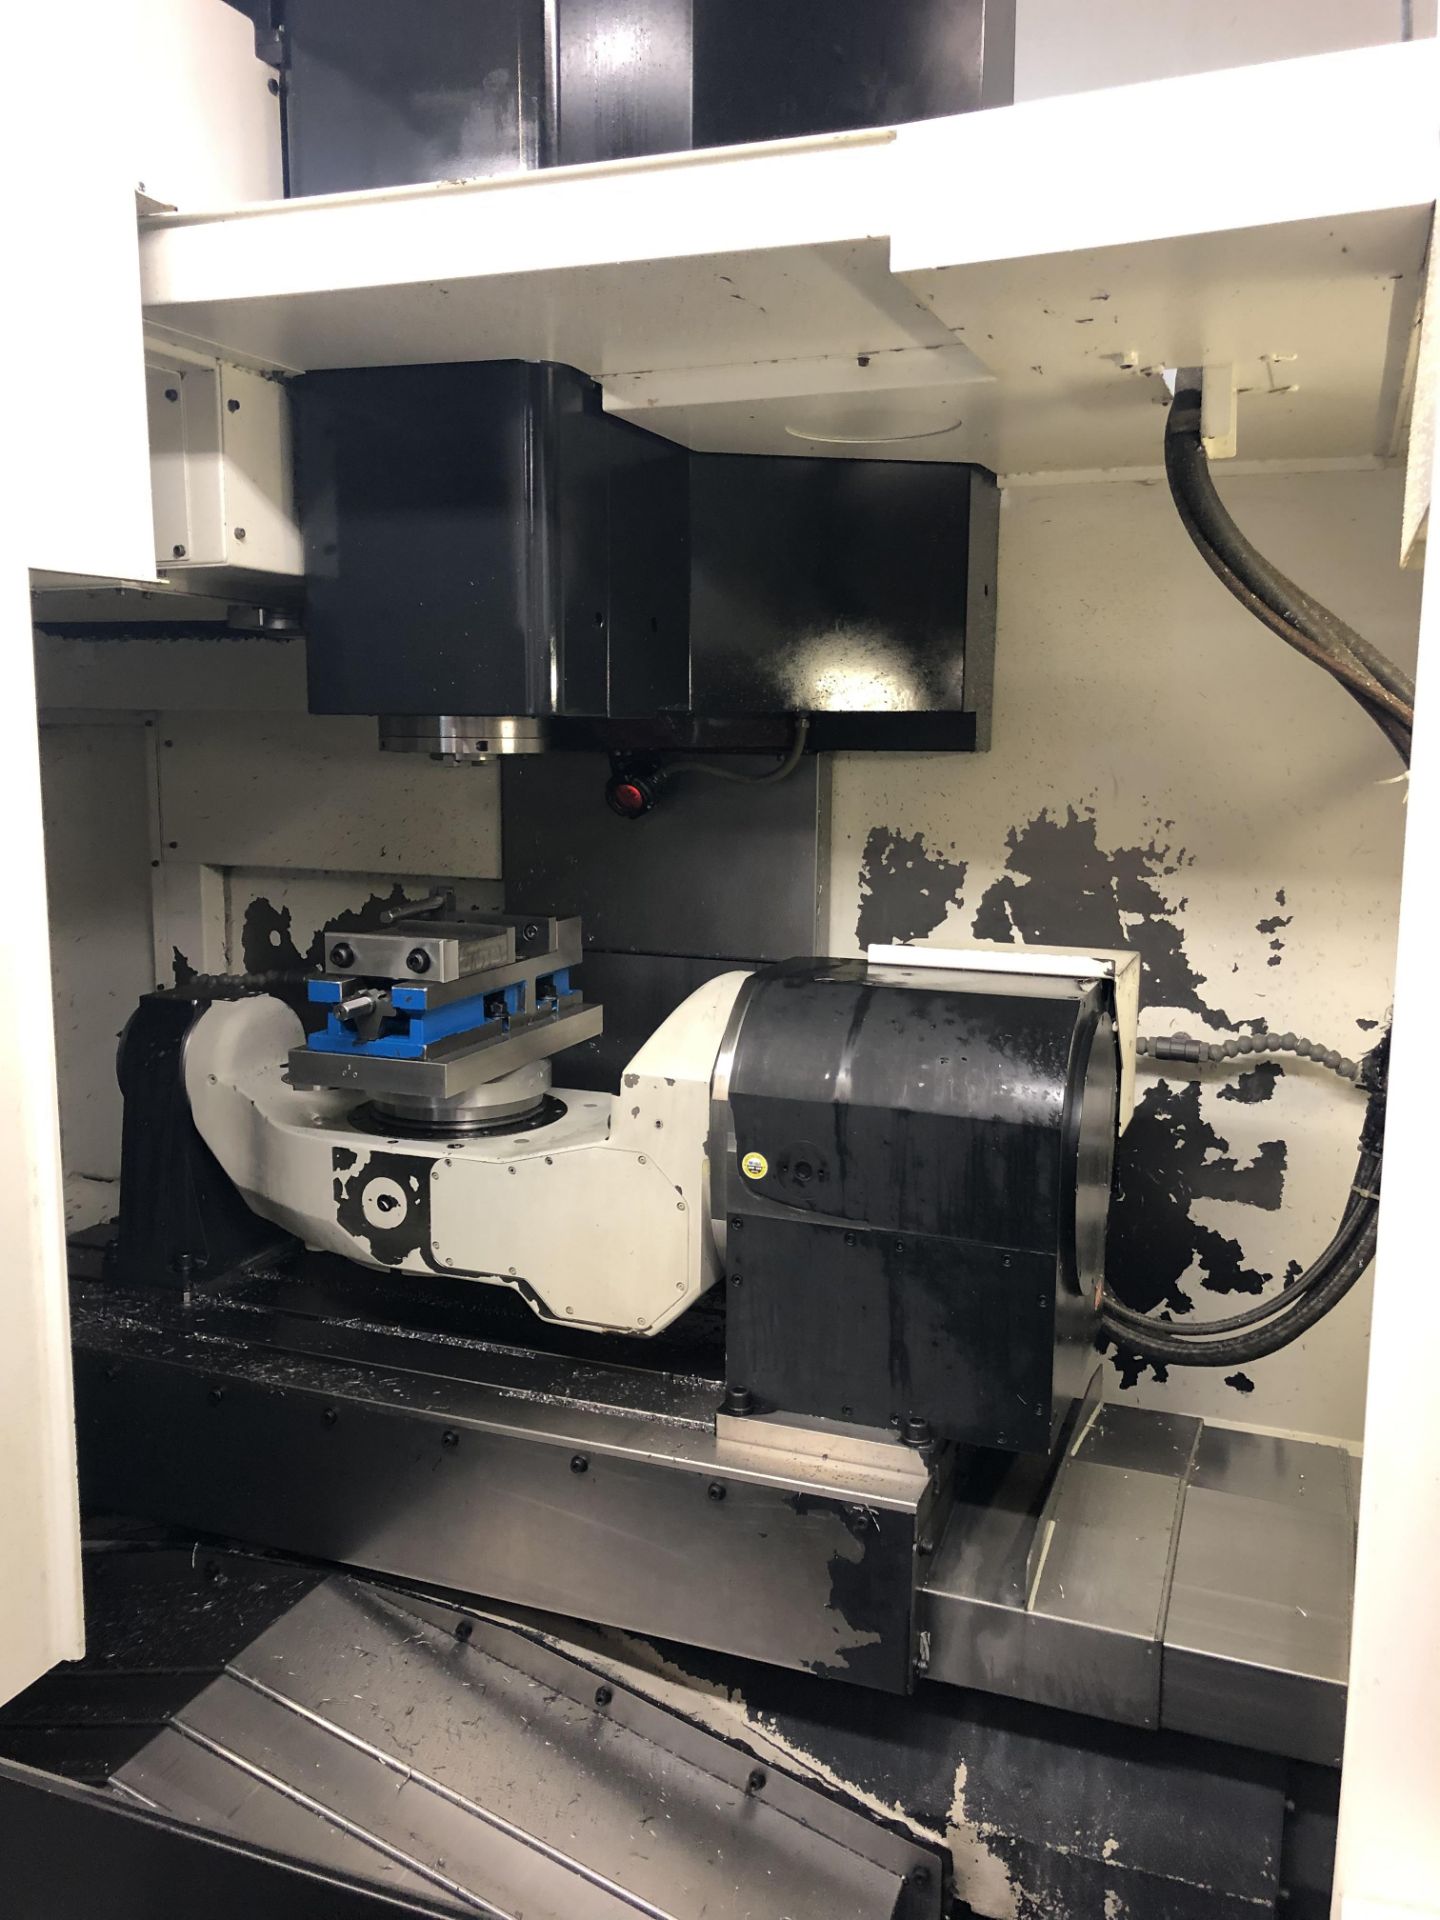 2011 Mazak VCN 510C-II 5X Vertical Machining Center- 25 HP Spindle Motor, 12,000 RPM Spindle - Image 2 of 3